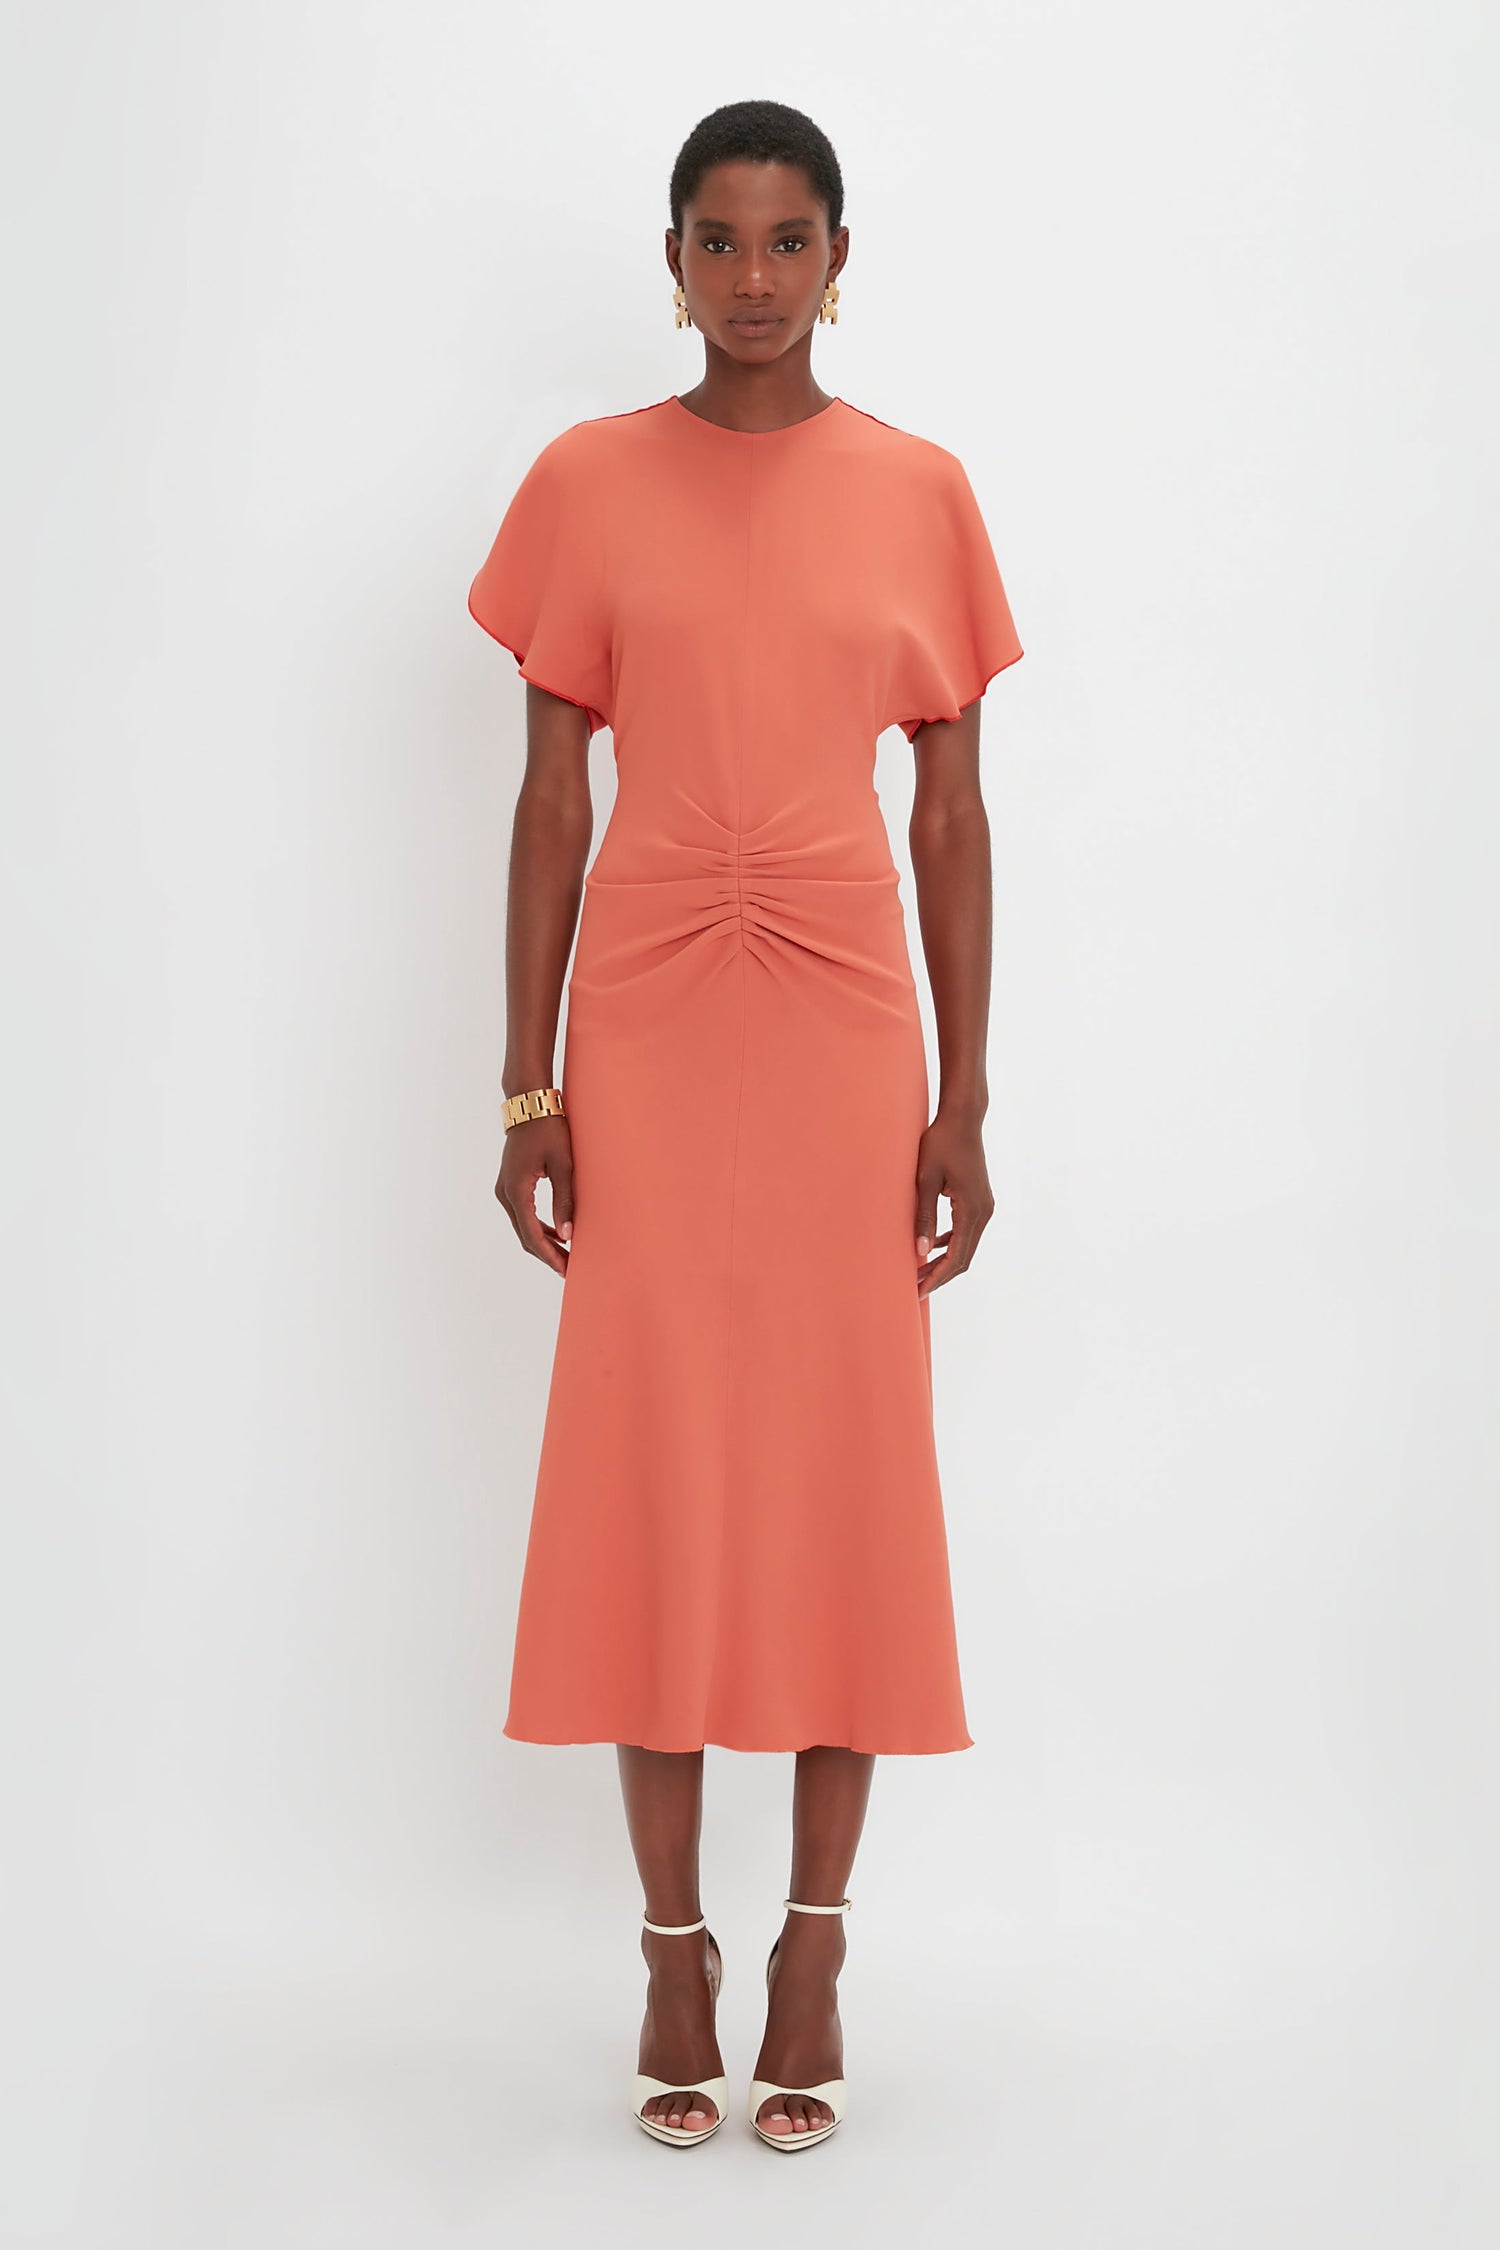 A woman standing against a white background, wearing an orange midi dress with short sleeves and a twisted detail at the waist, paired with Pointy Toe Stiletto heels. She is wearing the Gathered Waist Midi Dress In Papaya by Victoria Beckham.